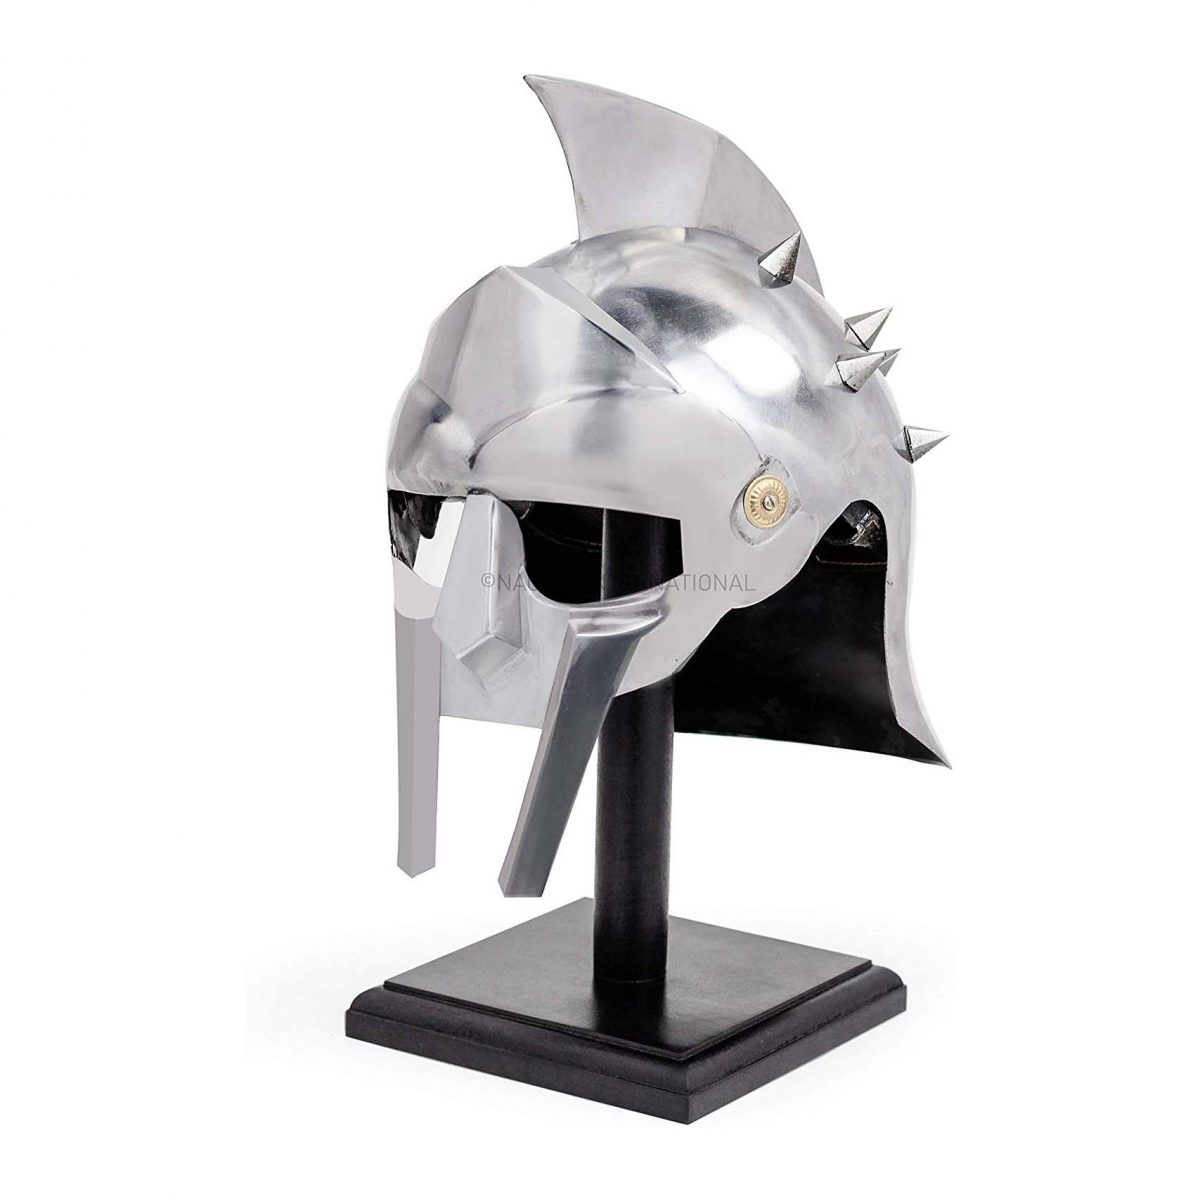 Nagina International The Great Mini Gladiator Maximum Helmet With Display Stand - Rennactor Helmet With Leather Strap | Halloween Props For Larpers